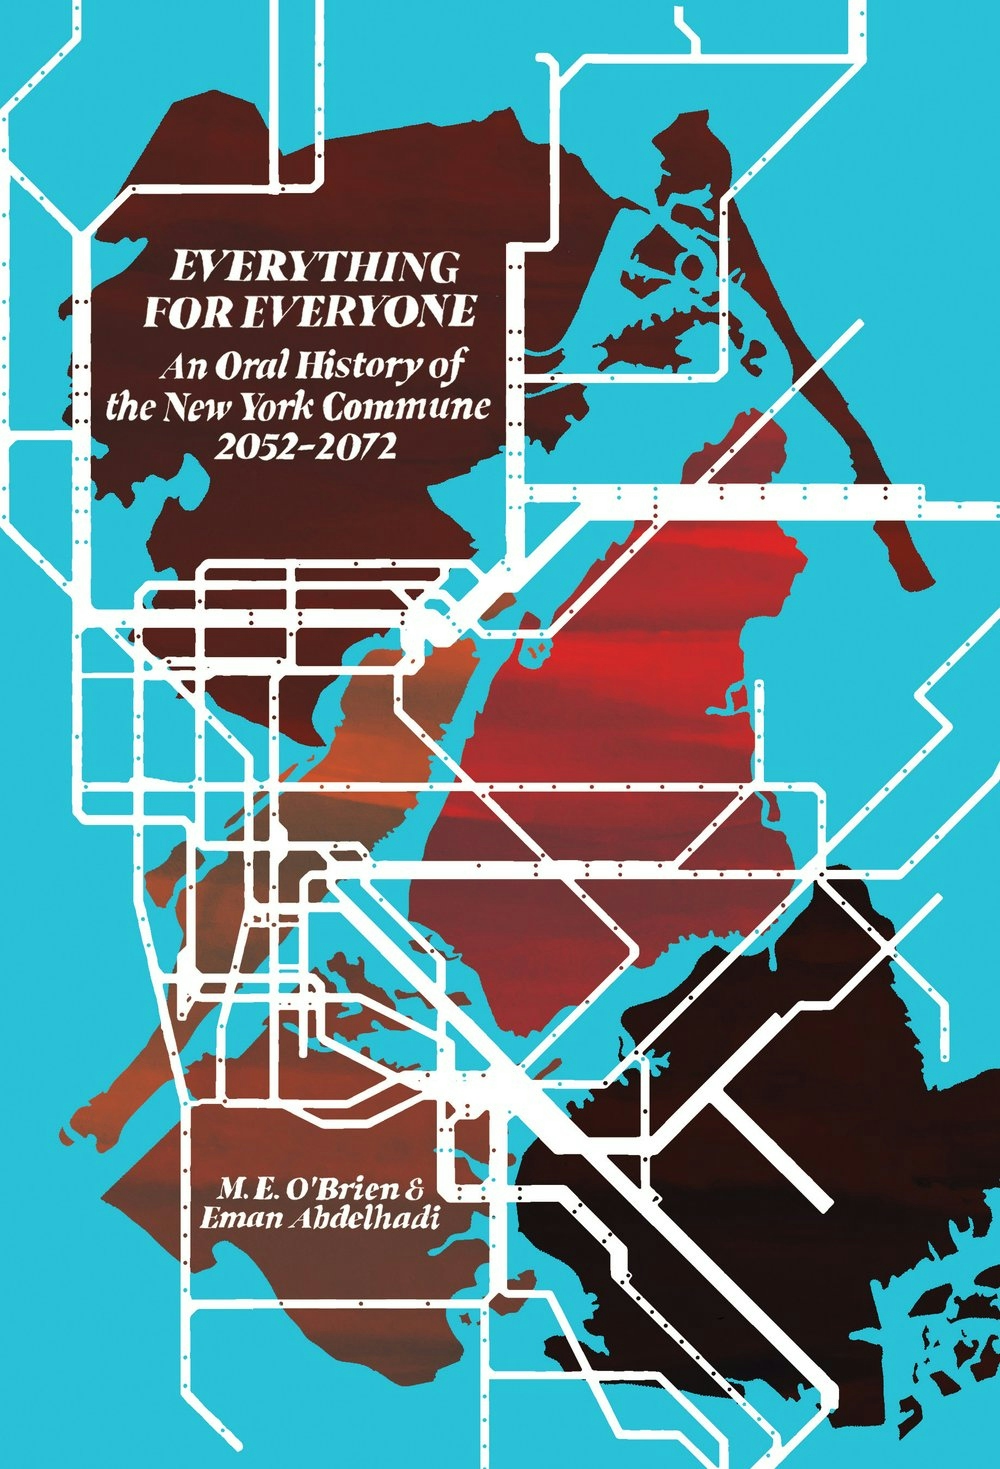 Album artwork for Everything for Everyone: An Oral History of the New York Commune, 2052-2072 by M. E. O’Brien and Eman Abdelhadi